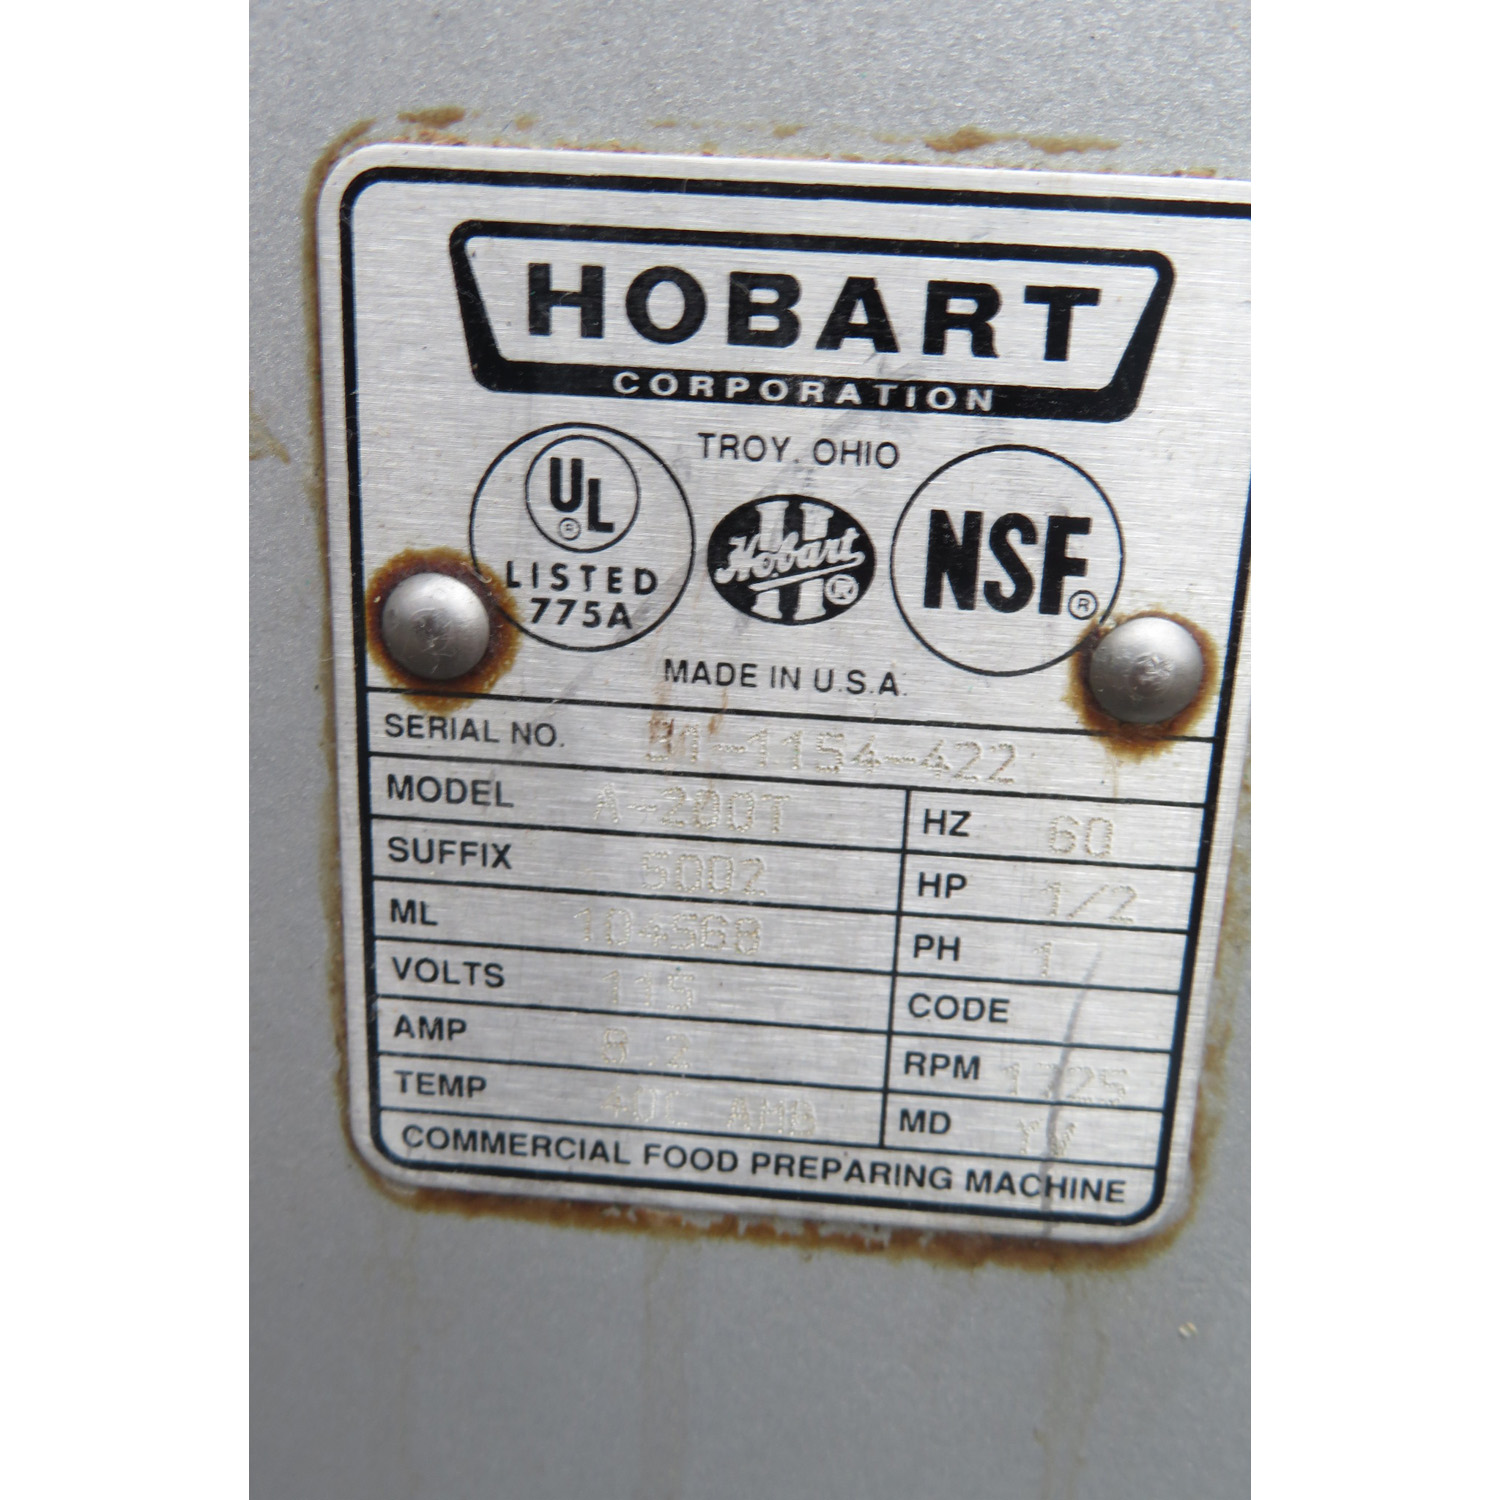 Hobart 20 Quart A200T Mixer, Used Great Condition image 3